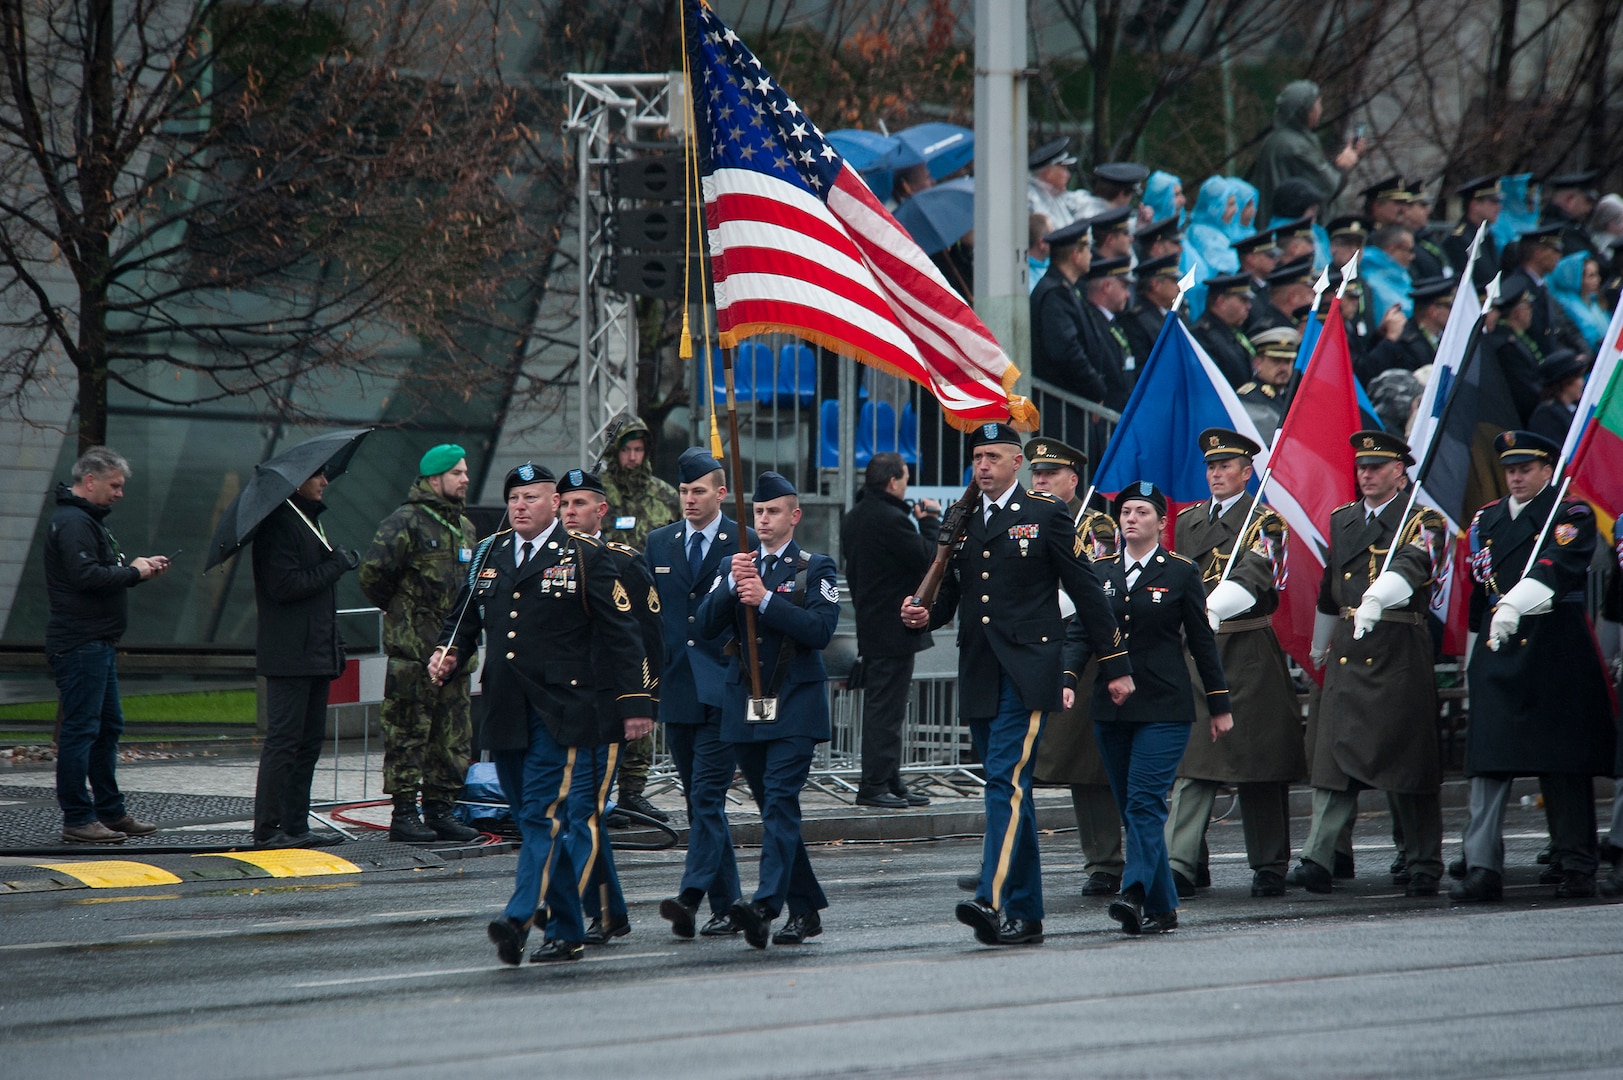 Soldiers and Airmen of the Nebraska and Texas National Guard carry the United States flag while representing the United States during the Czech Republic Military Parade, Oct. 28, 2018, in Prague, Czech Republic. The parade was part of a weekend celebration marking the 100th anniversary of the establishment of Czechoslovakia in 1918. Representing the United States during the parade were: Tech. Sgt. Darren Davlin (Nebraska), Senior Airman Avery Prai (Nebraska), Pfc. Alexa Nelson (Nebraska), Sgt. 1st Class Robb Miller (Texas), Staff Sgt. Eric Halliburton (Texas), and Sgt. Adrian Tejerina (Texas).